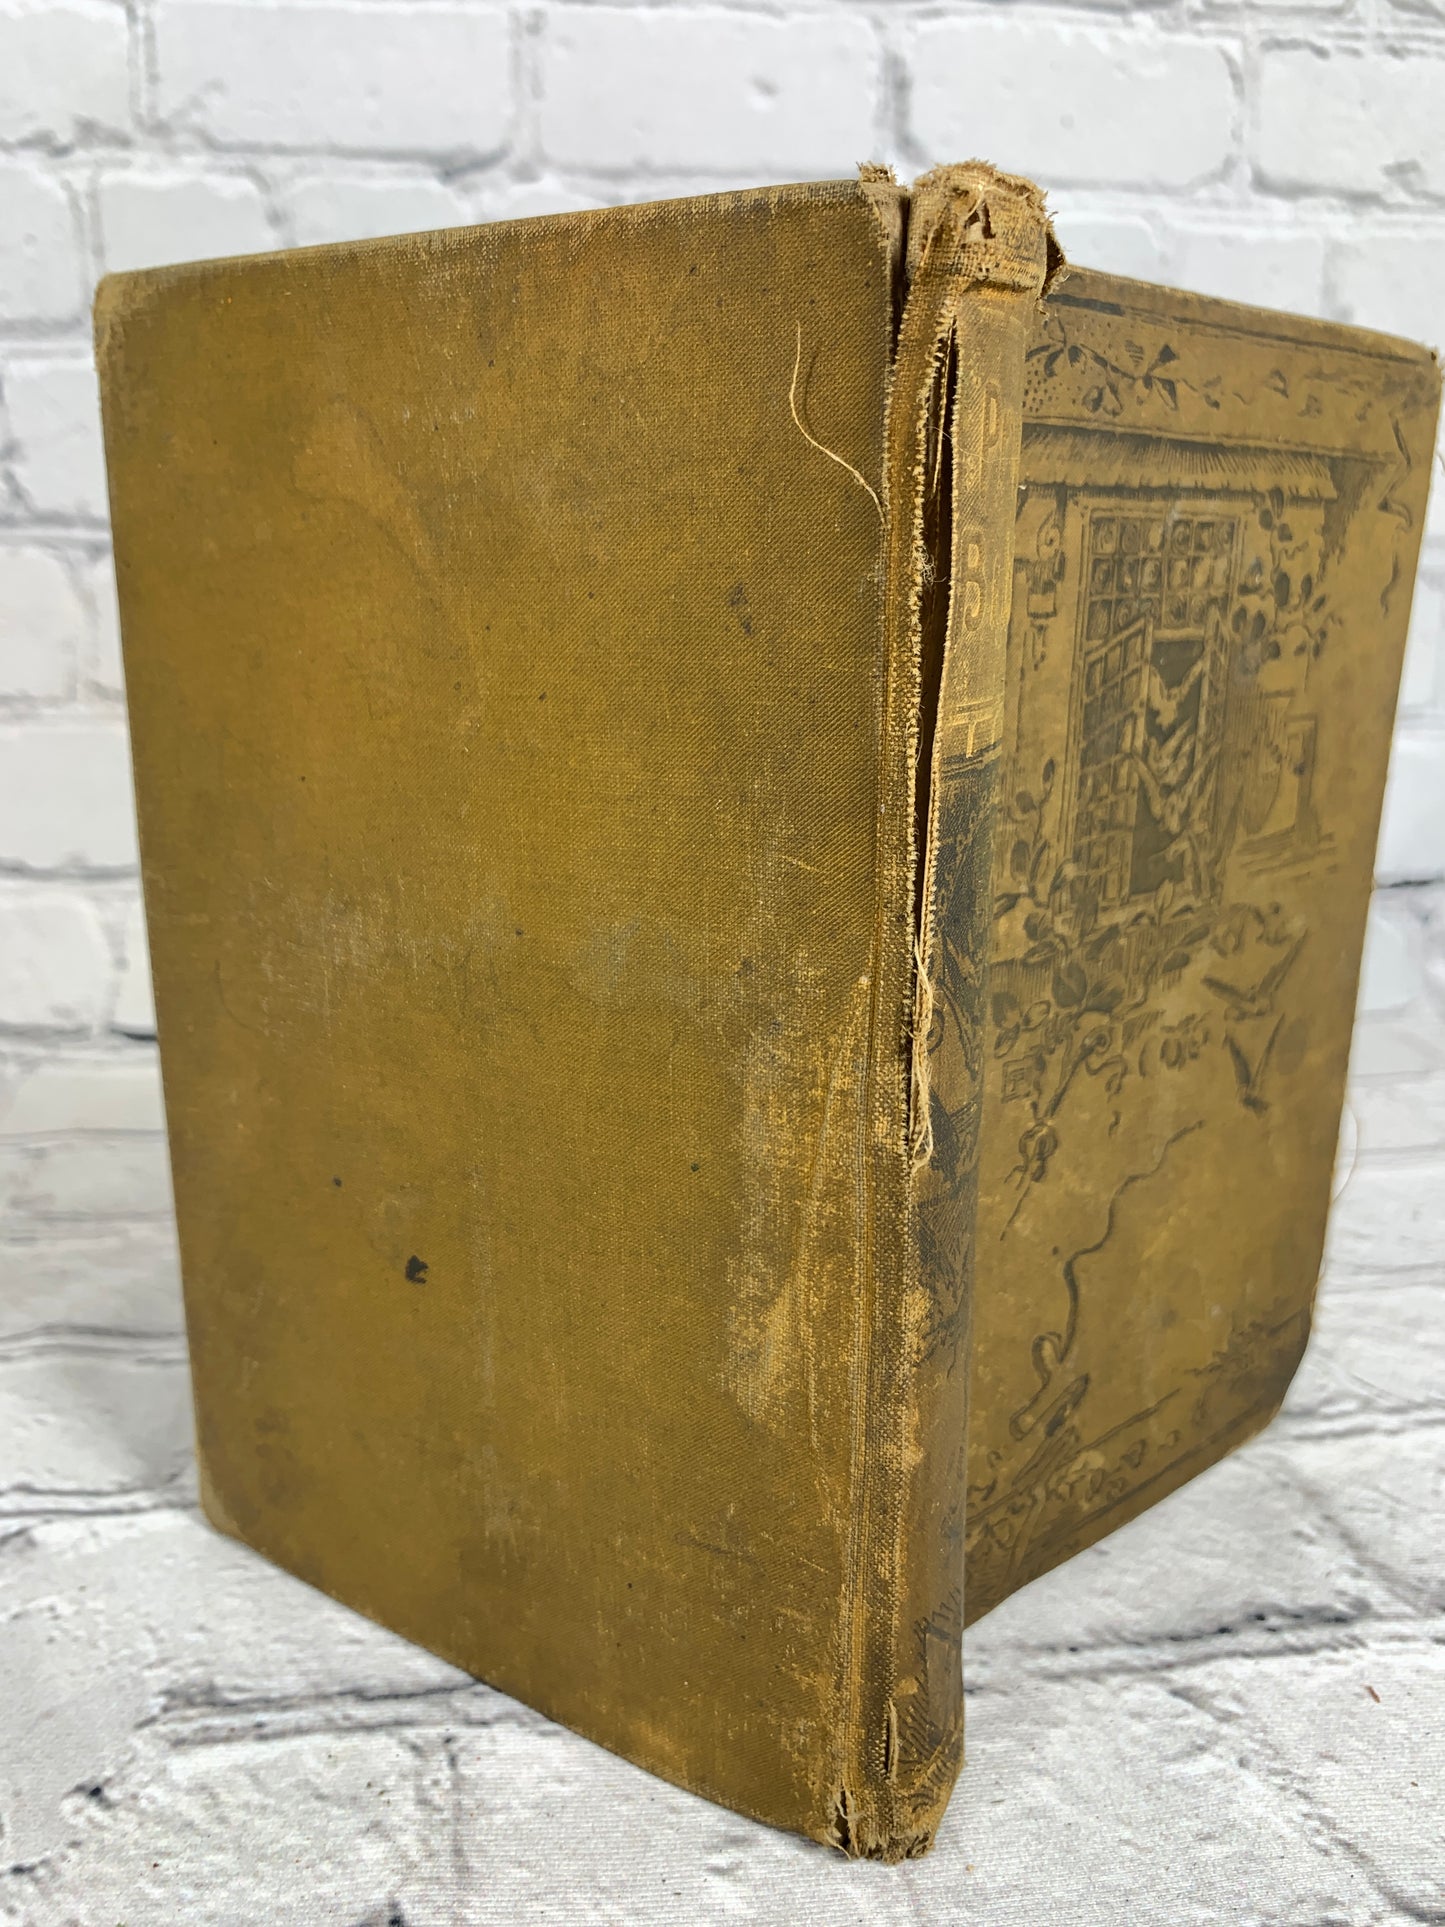 The Prize Bible or Covetousness by Madeline Leslie [Late 1800s]